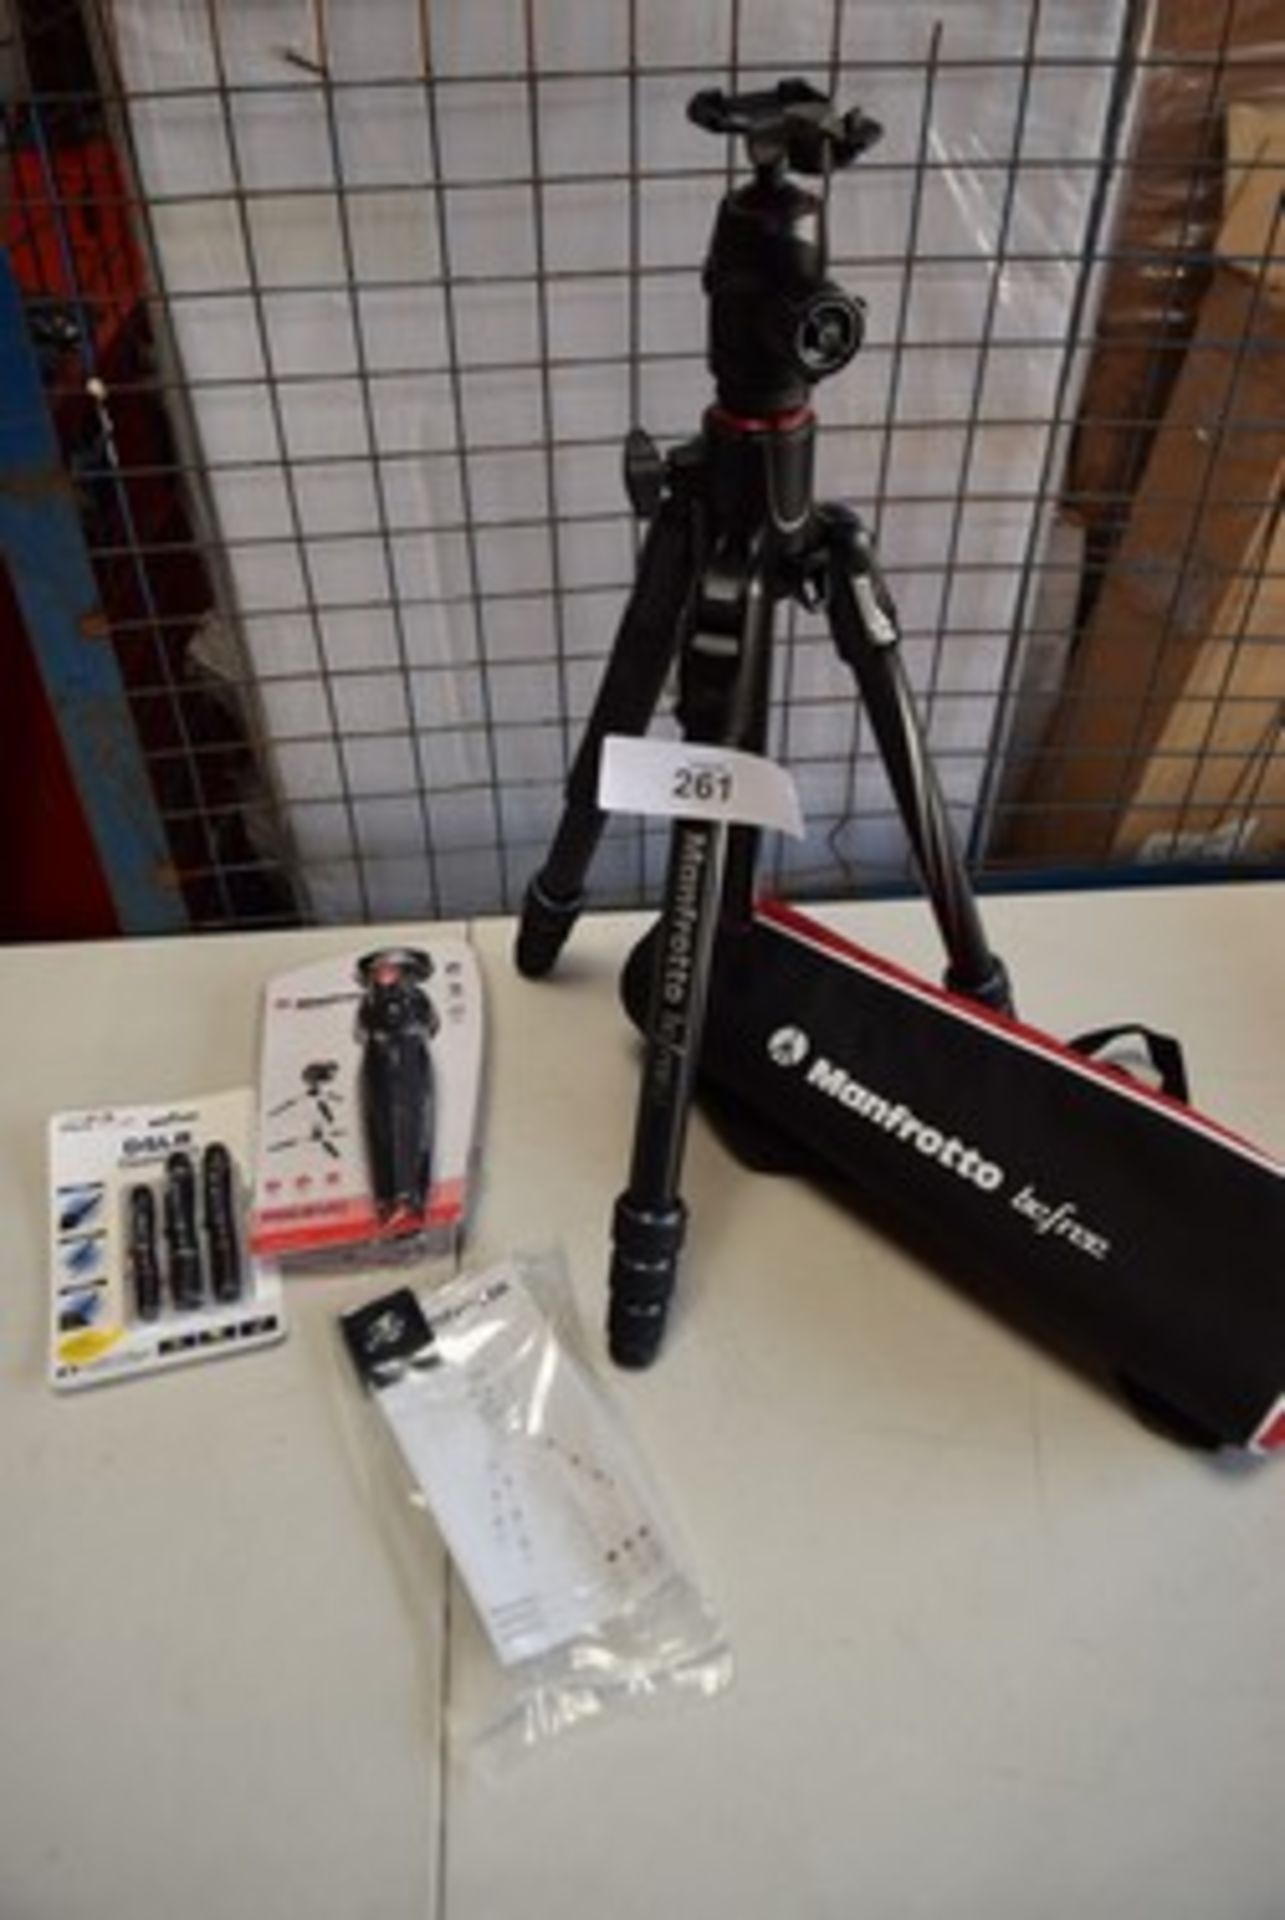 1 x Manfrotto Befree GT Xpro aluminium tripod, in carry bag, item No: MKBFRA4GTXP-BH, together